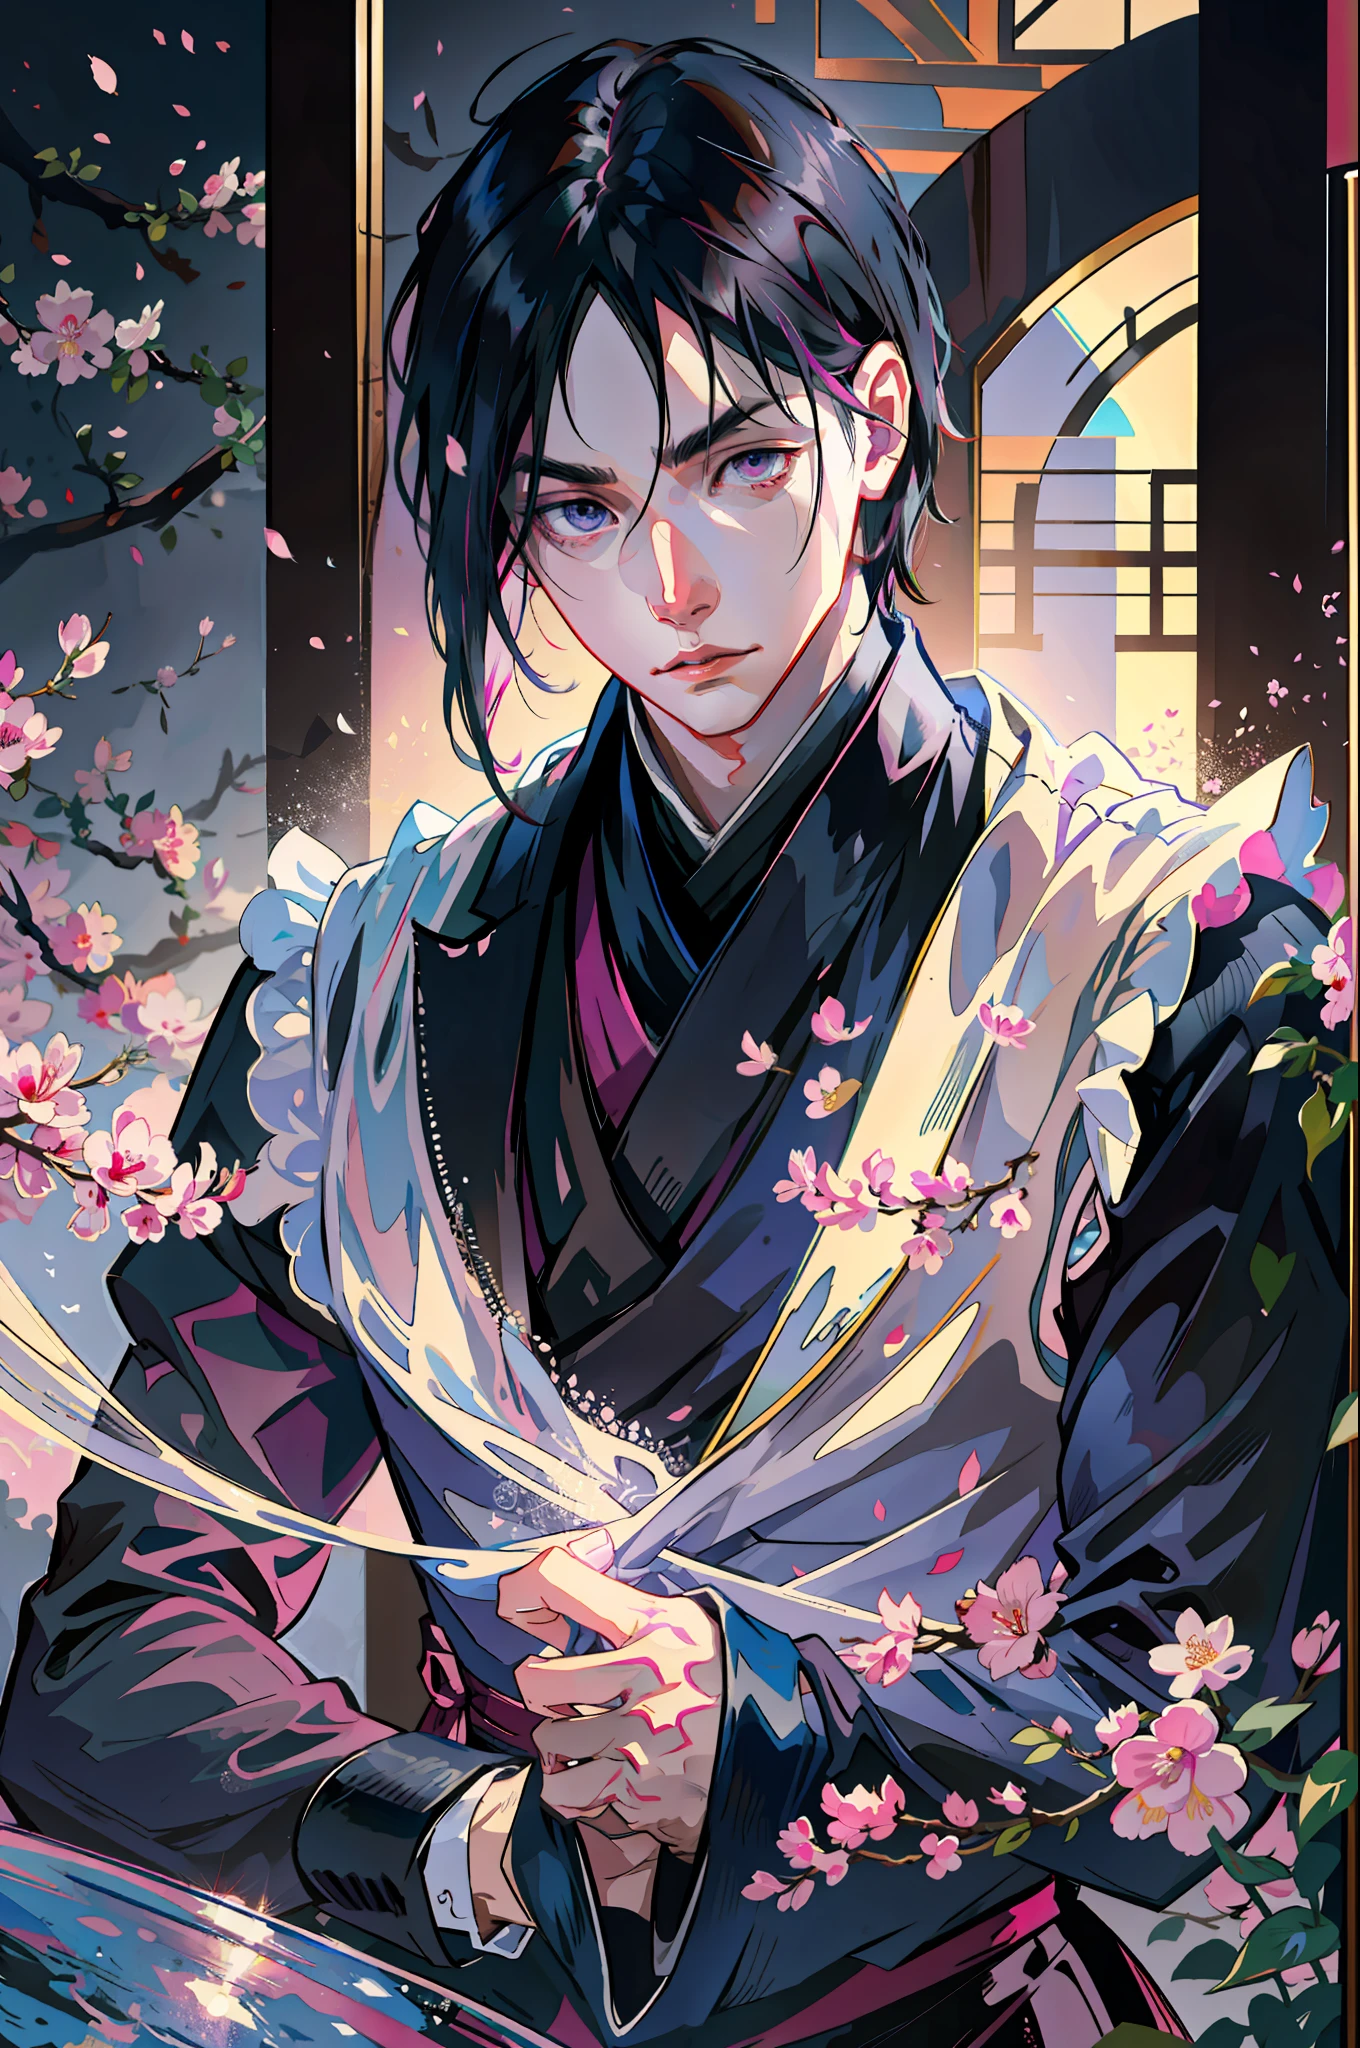 masterpiece, best quality, 1 man, adult, handsome, tall and muscular boy, broad shoulders, finely detailed eyes and detailed face, short black hair, sasuke, onyx color eyes, aristocrat, magnificent background, shadow effect, throne,(anime), sasuke uchiha,fantasy, 18th-century European aristocratic style, noble, garden, baroque, he is accompanied by a woman with pink hair, sakura, anime,